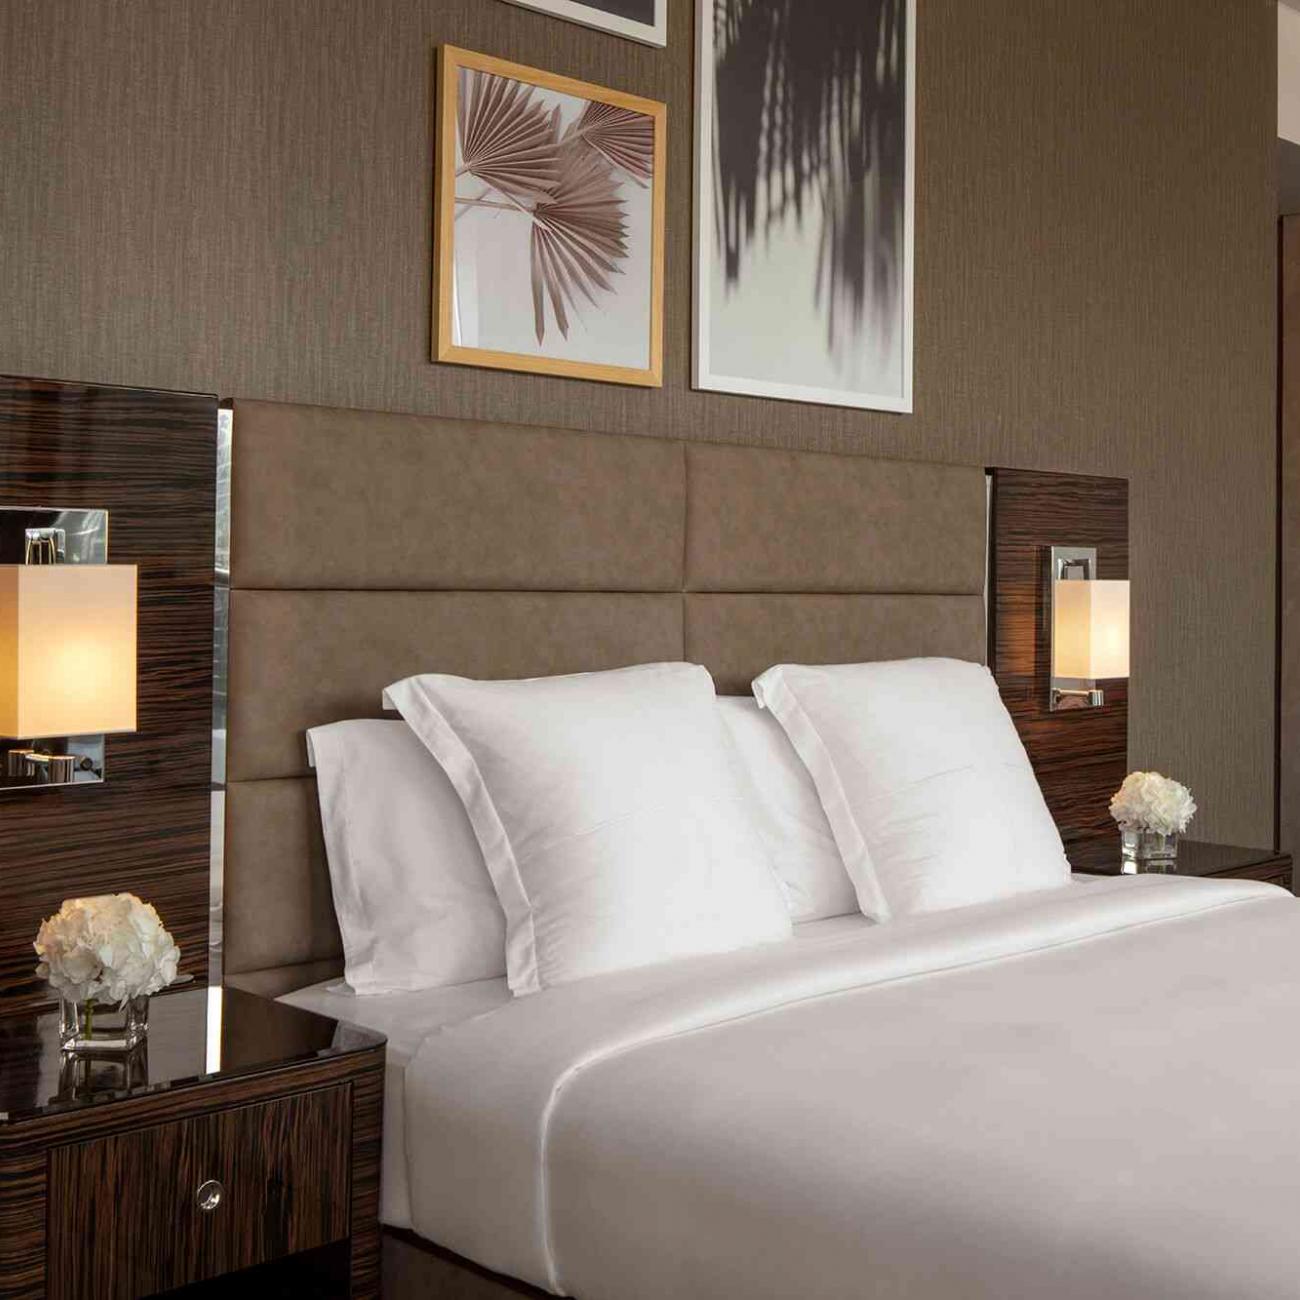 A king size bed with bedside tables and lamps, with several art prints on the wall